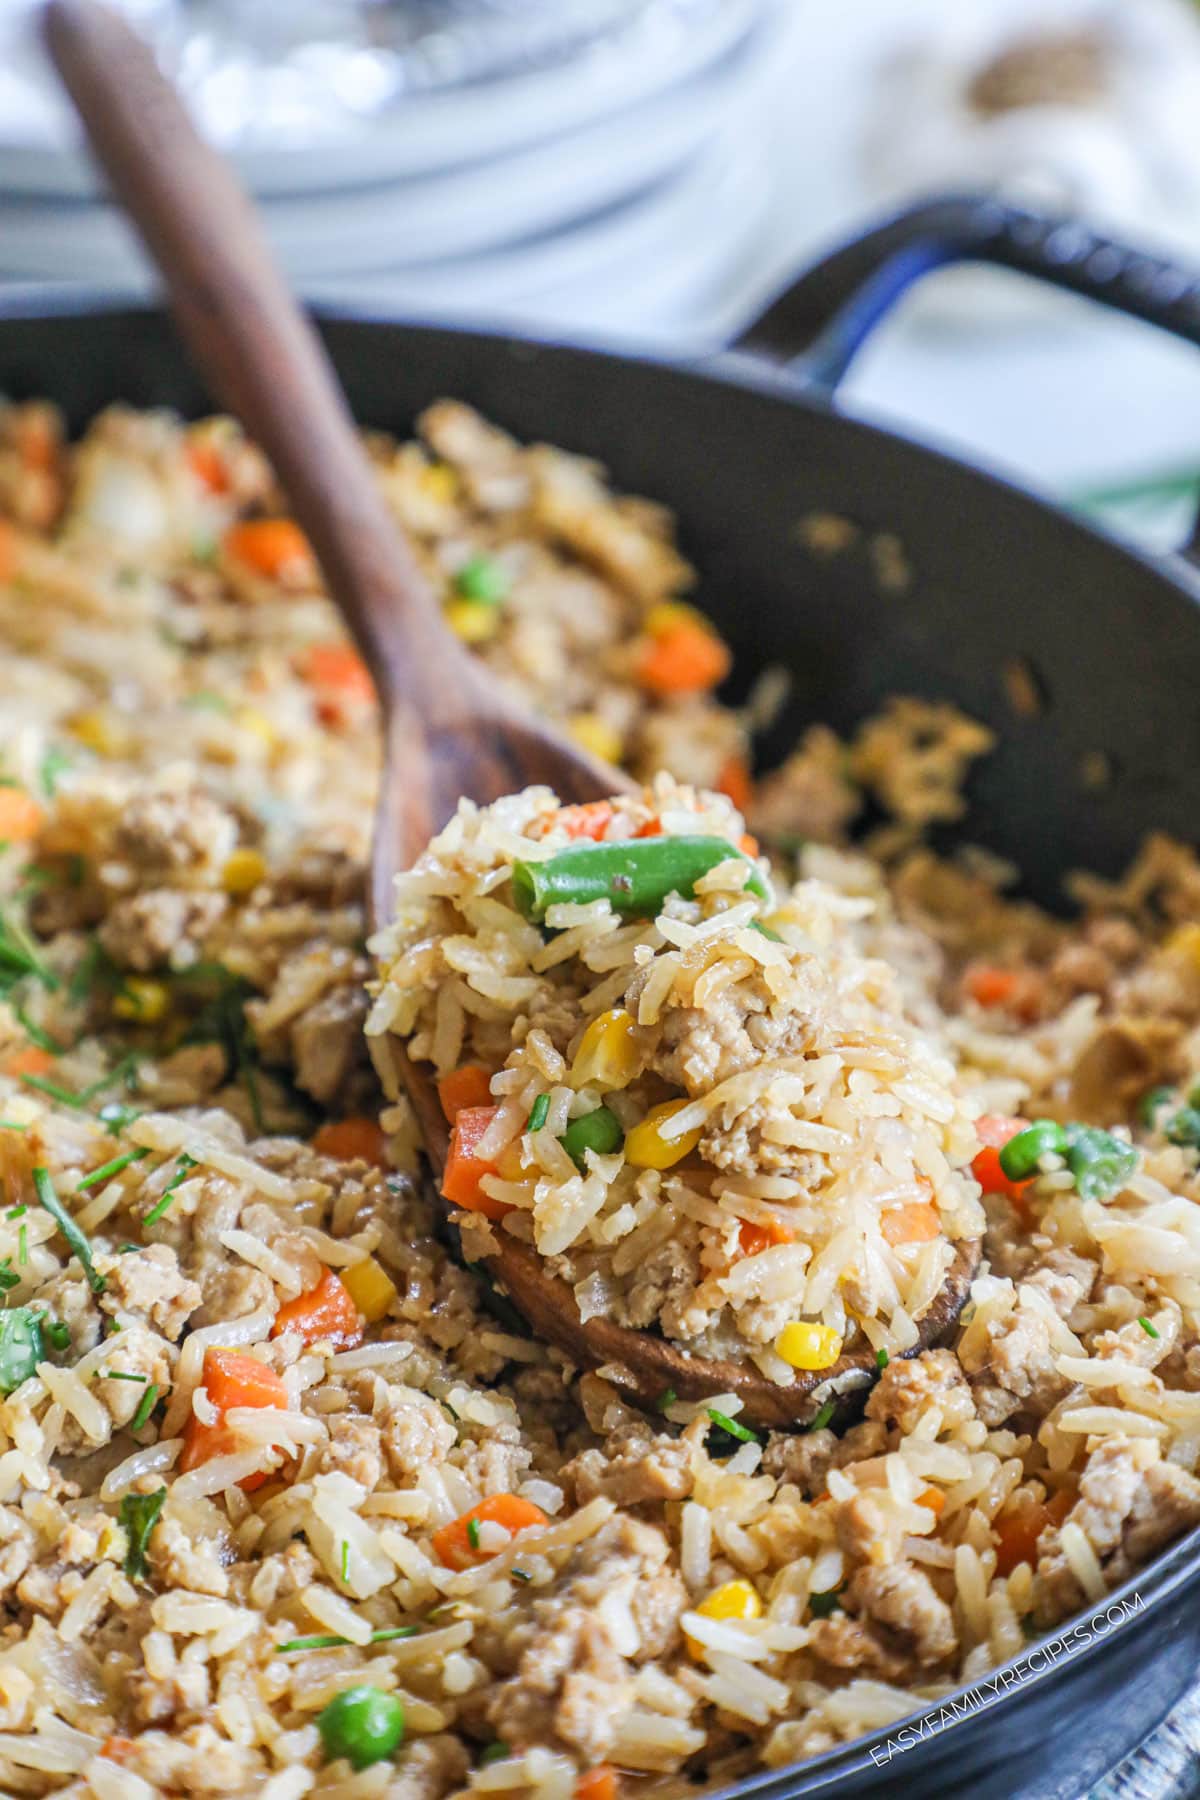 Fried Rice made with Ground Turkey in a skillet ready to eat